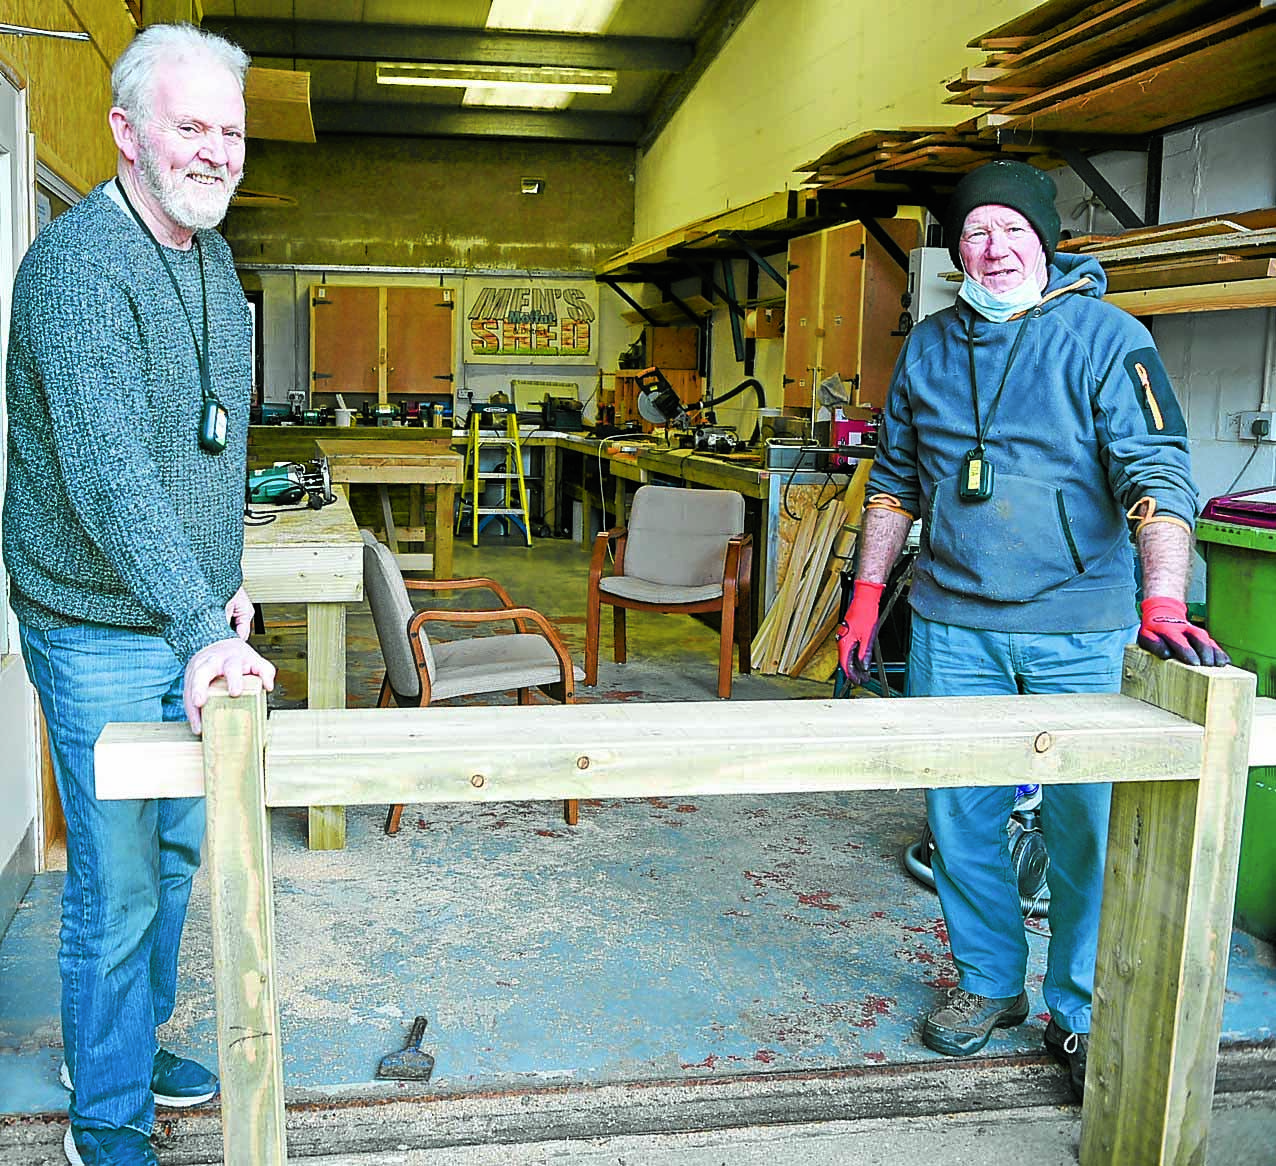 Take a pew on handmade benches